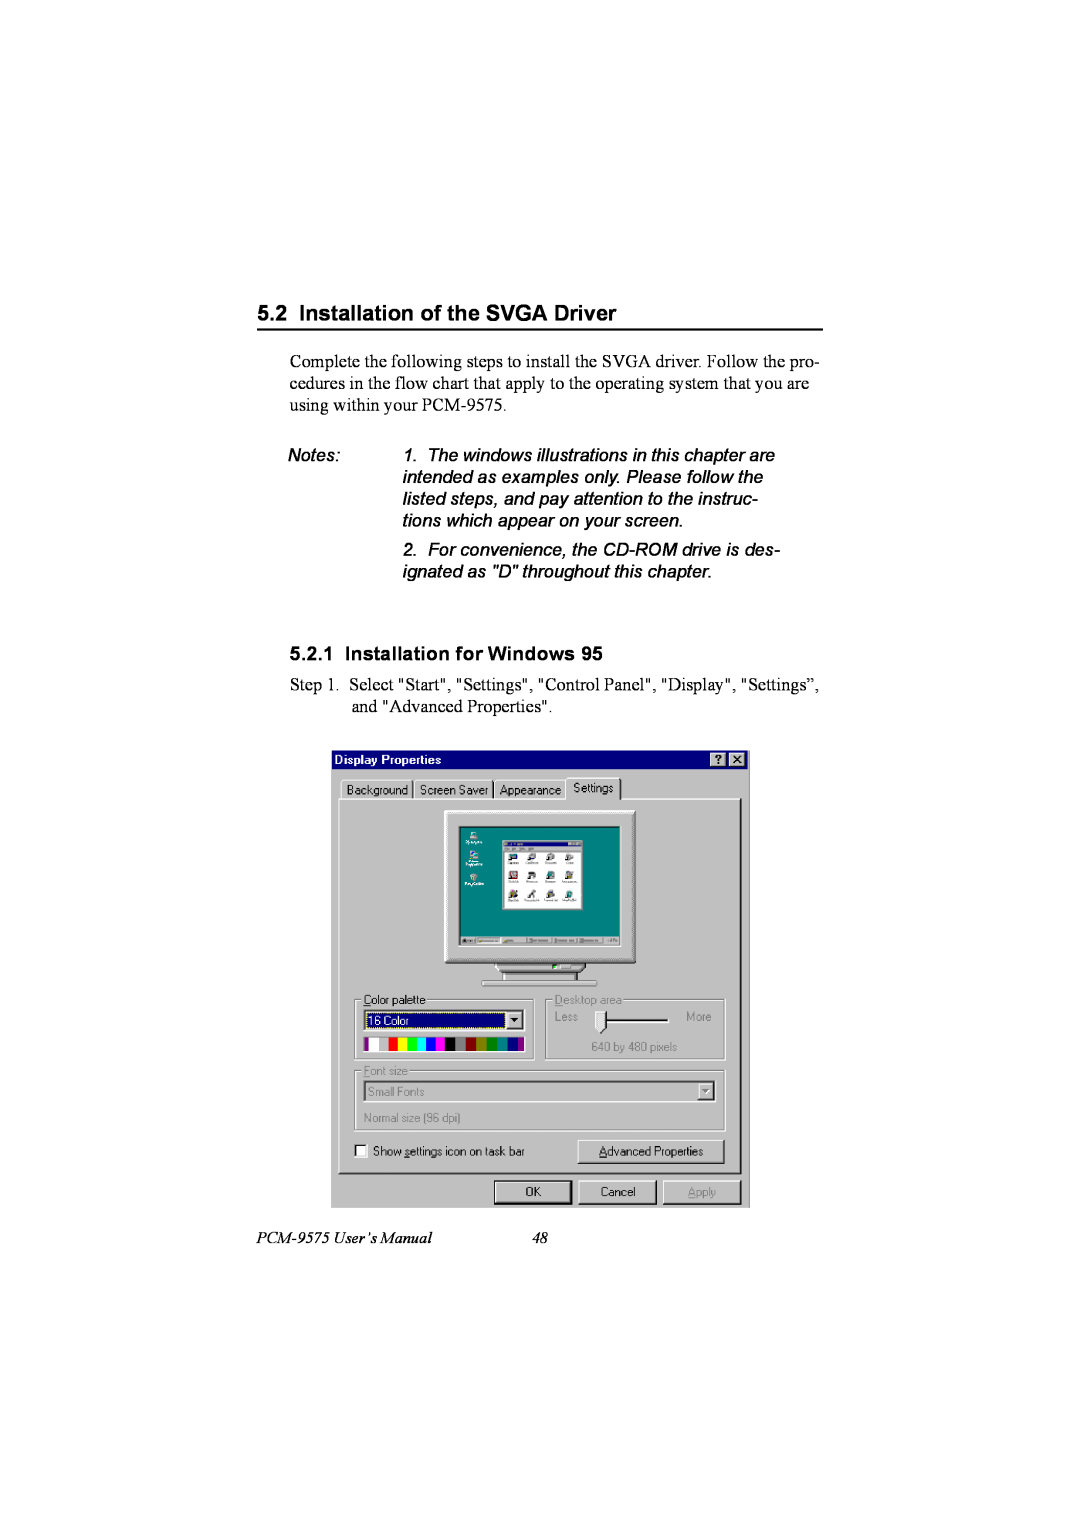 IBM PCM-9575 Installation of the SVGA Driver, Installation for Windows, The windows illustrations in this chapter are 